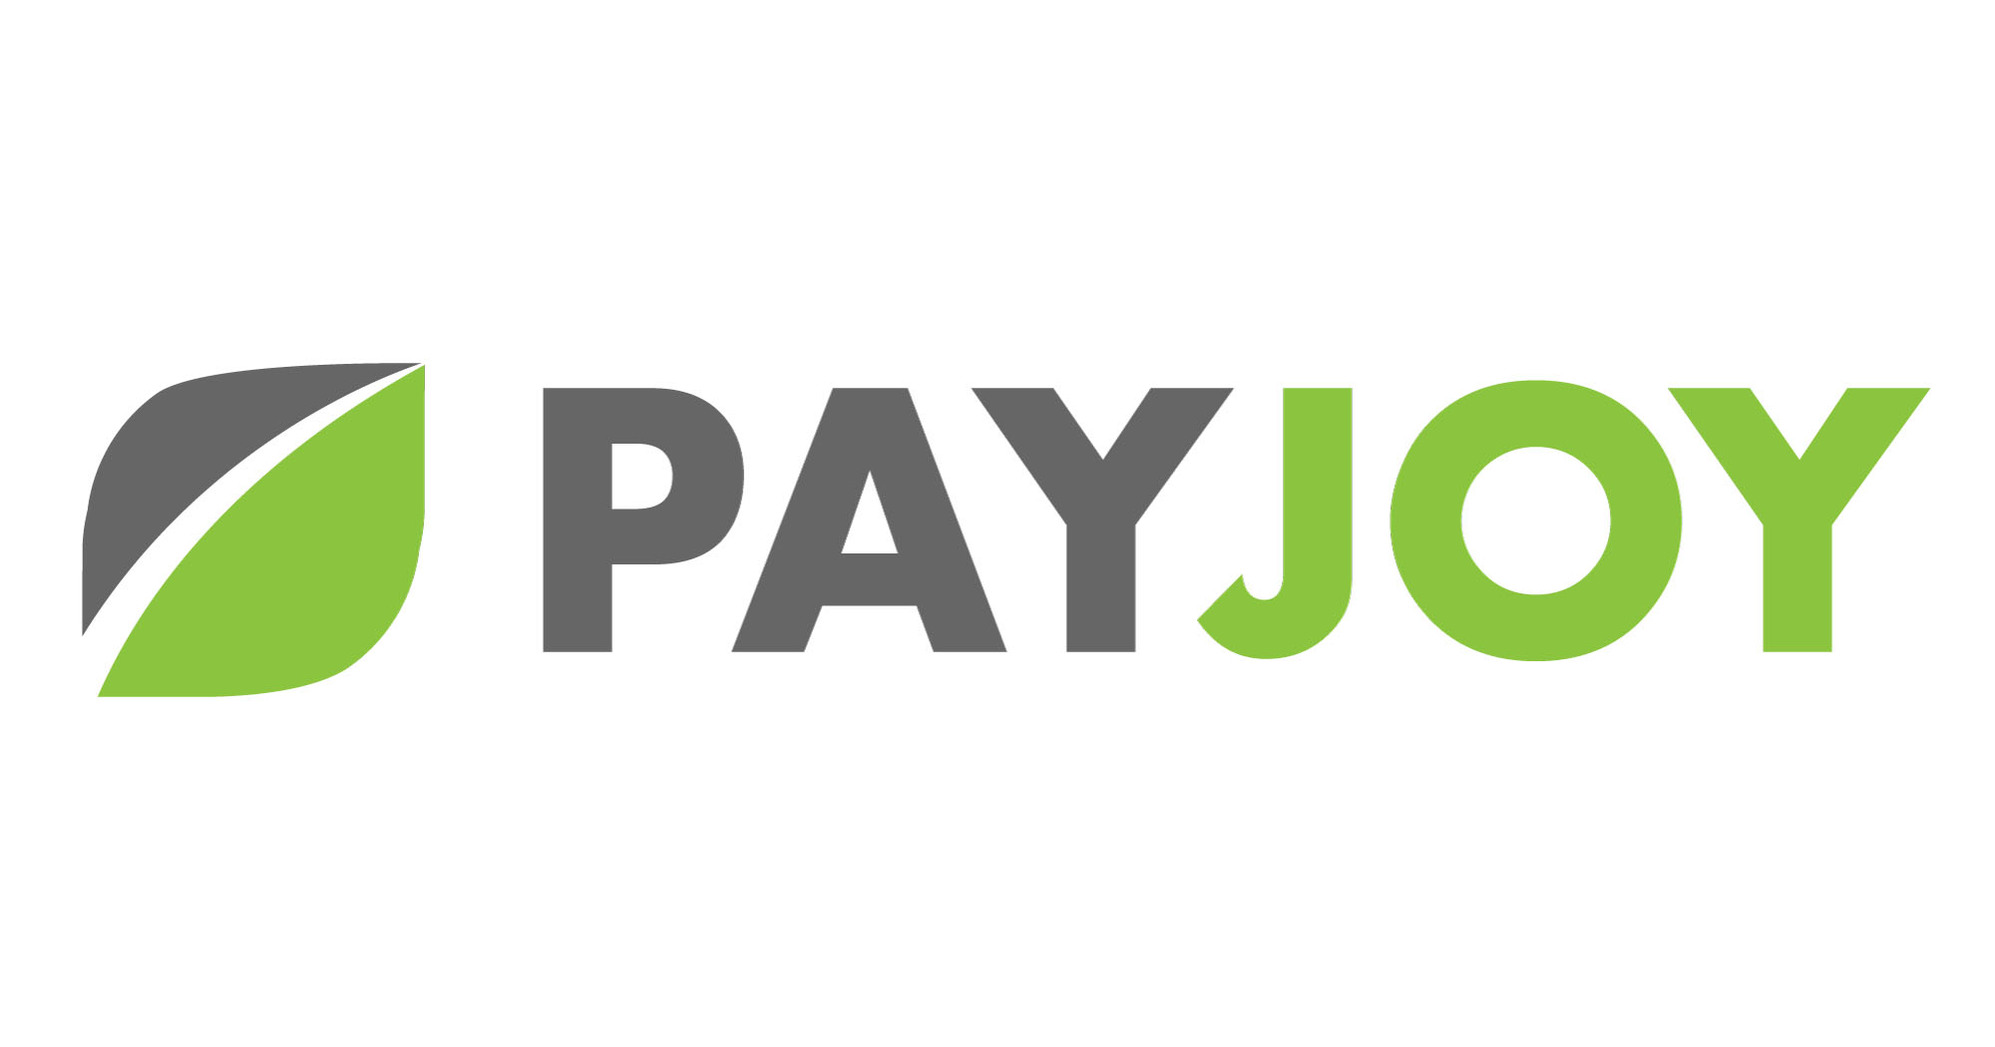 PayJoy Announces Compatibility with Africa's #1 Smartphone Manufacturer  Transsion and Other Leading Manufacturers via PayJoy Access